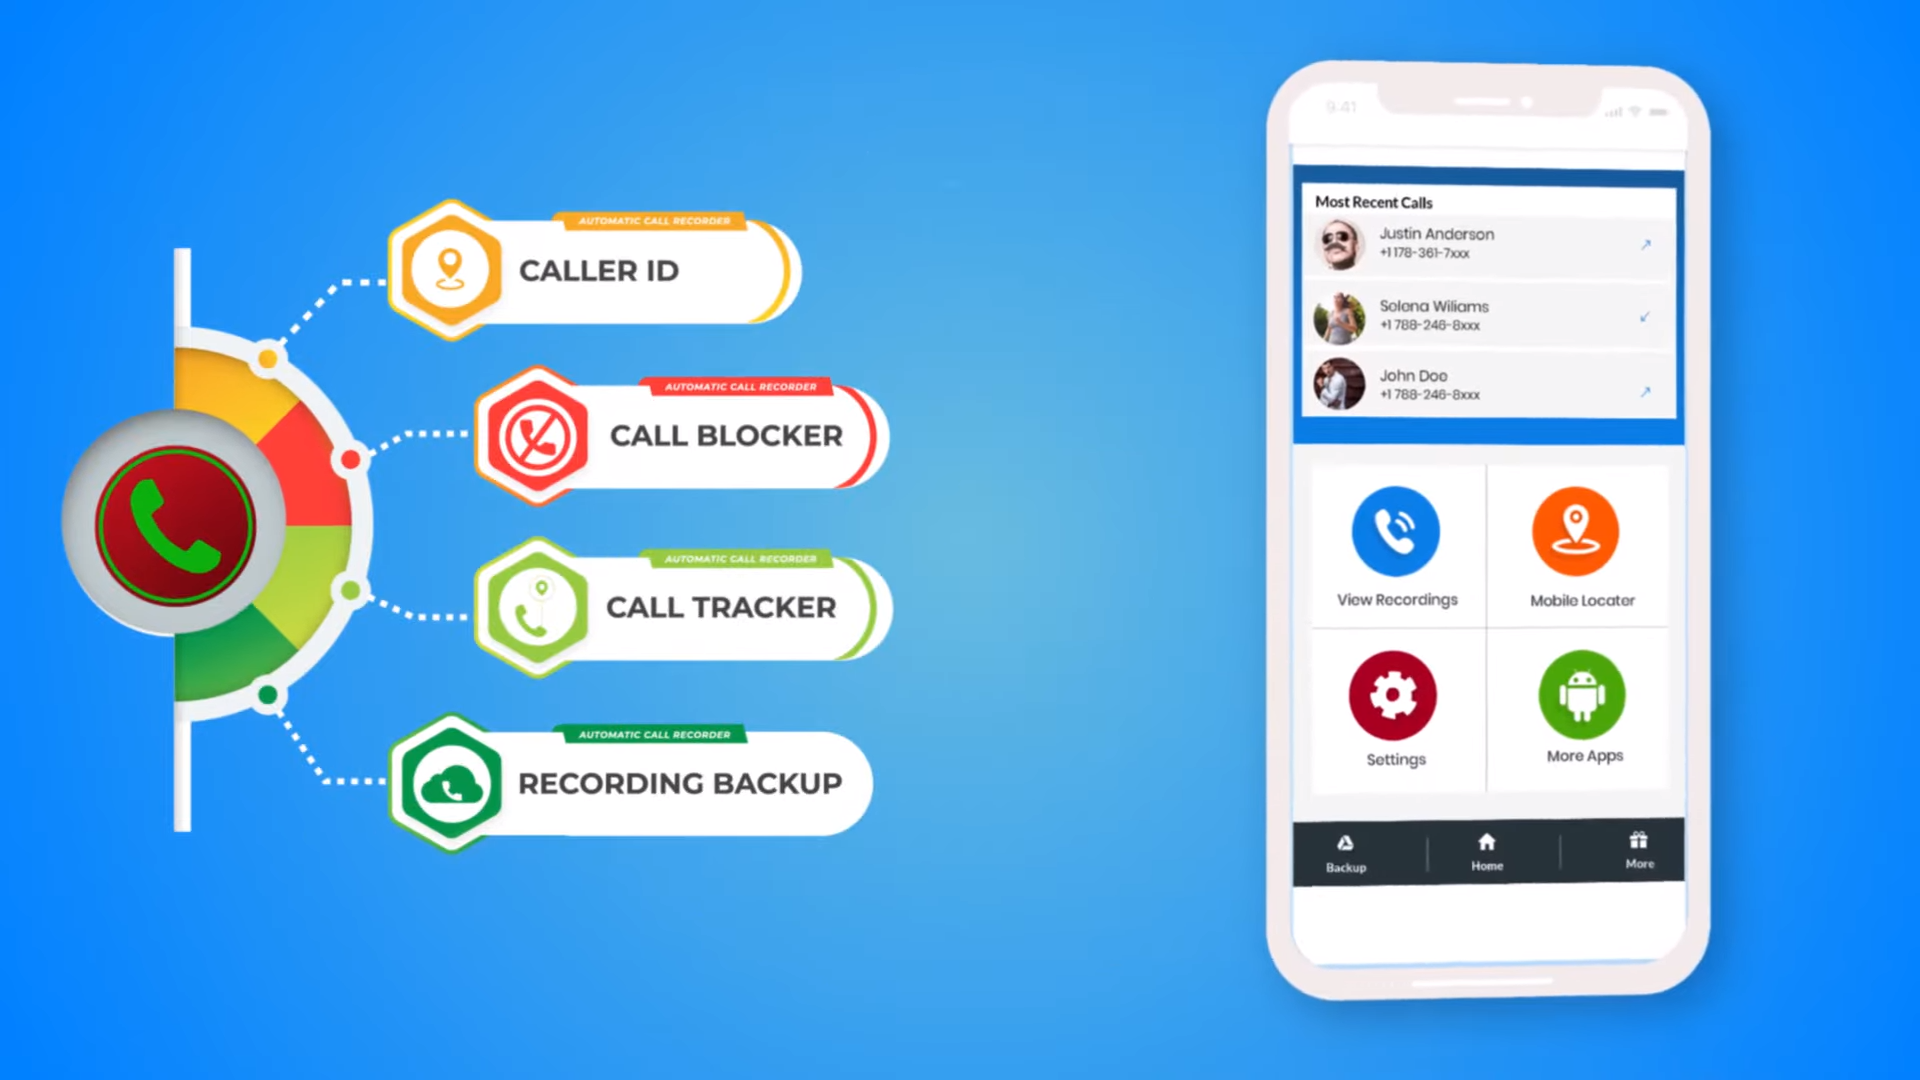 access and manage recorded calls